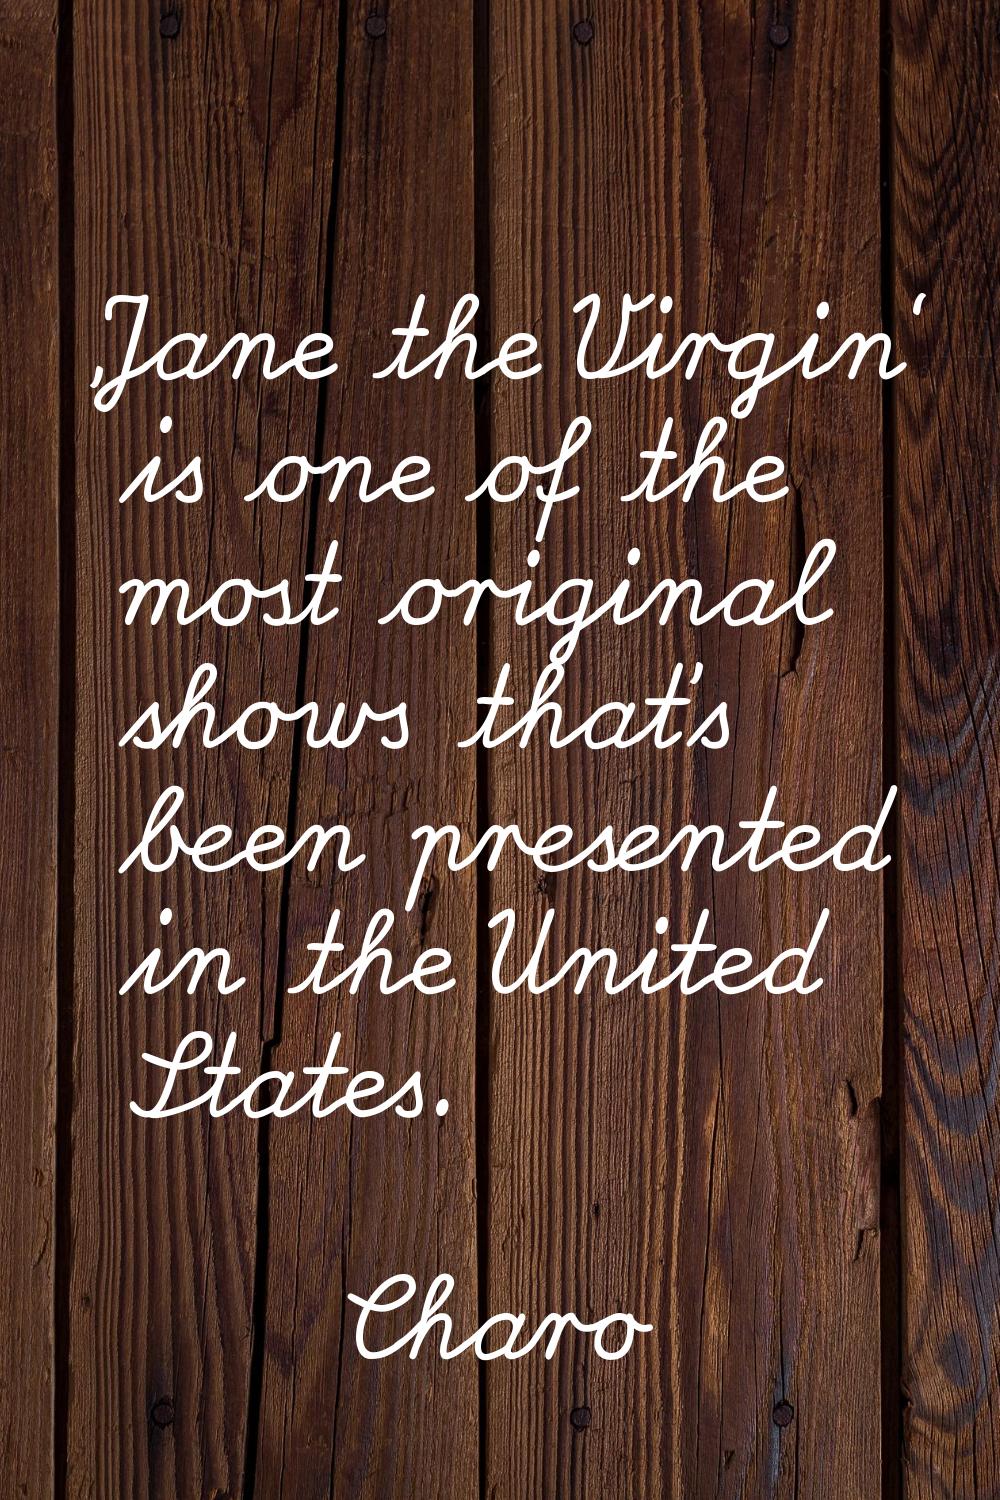 'Jane the Virgin' is one of the most original shows that's been presented in the United States.